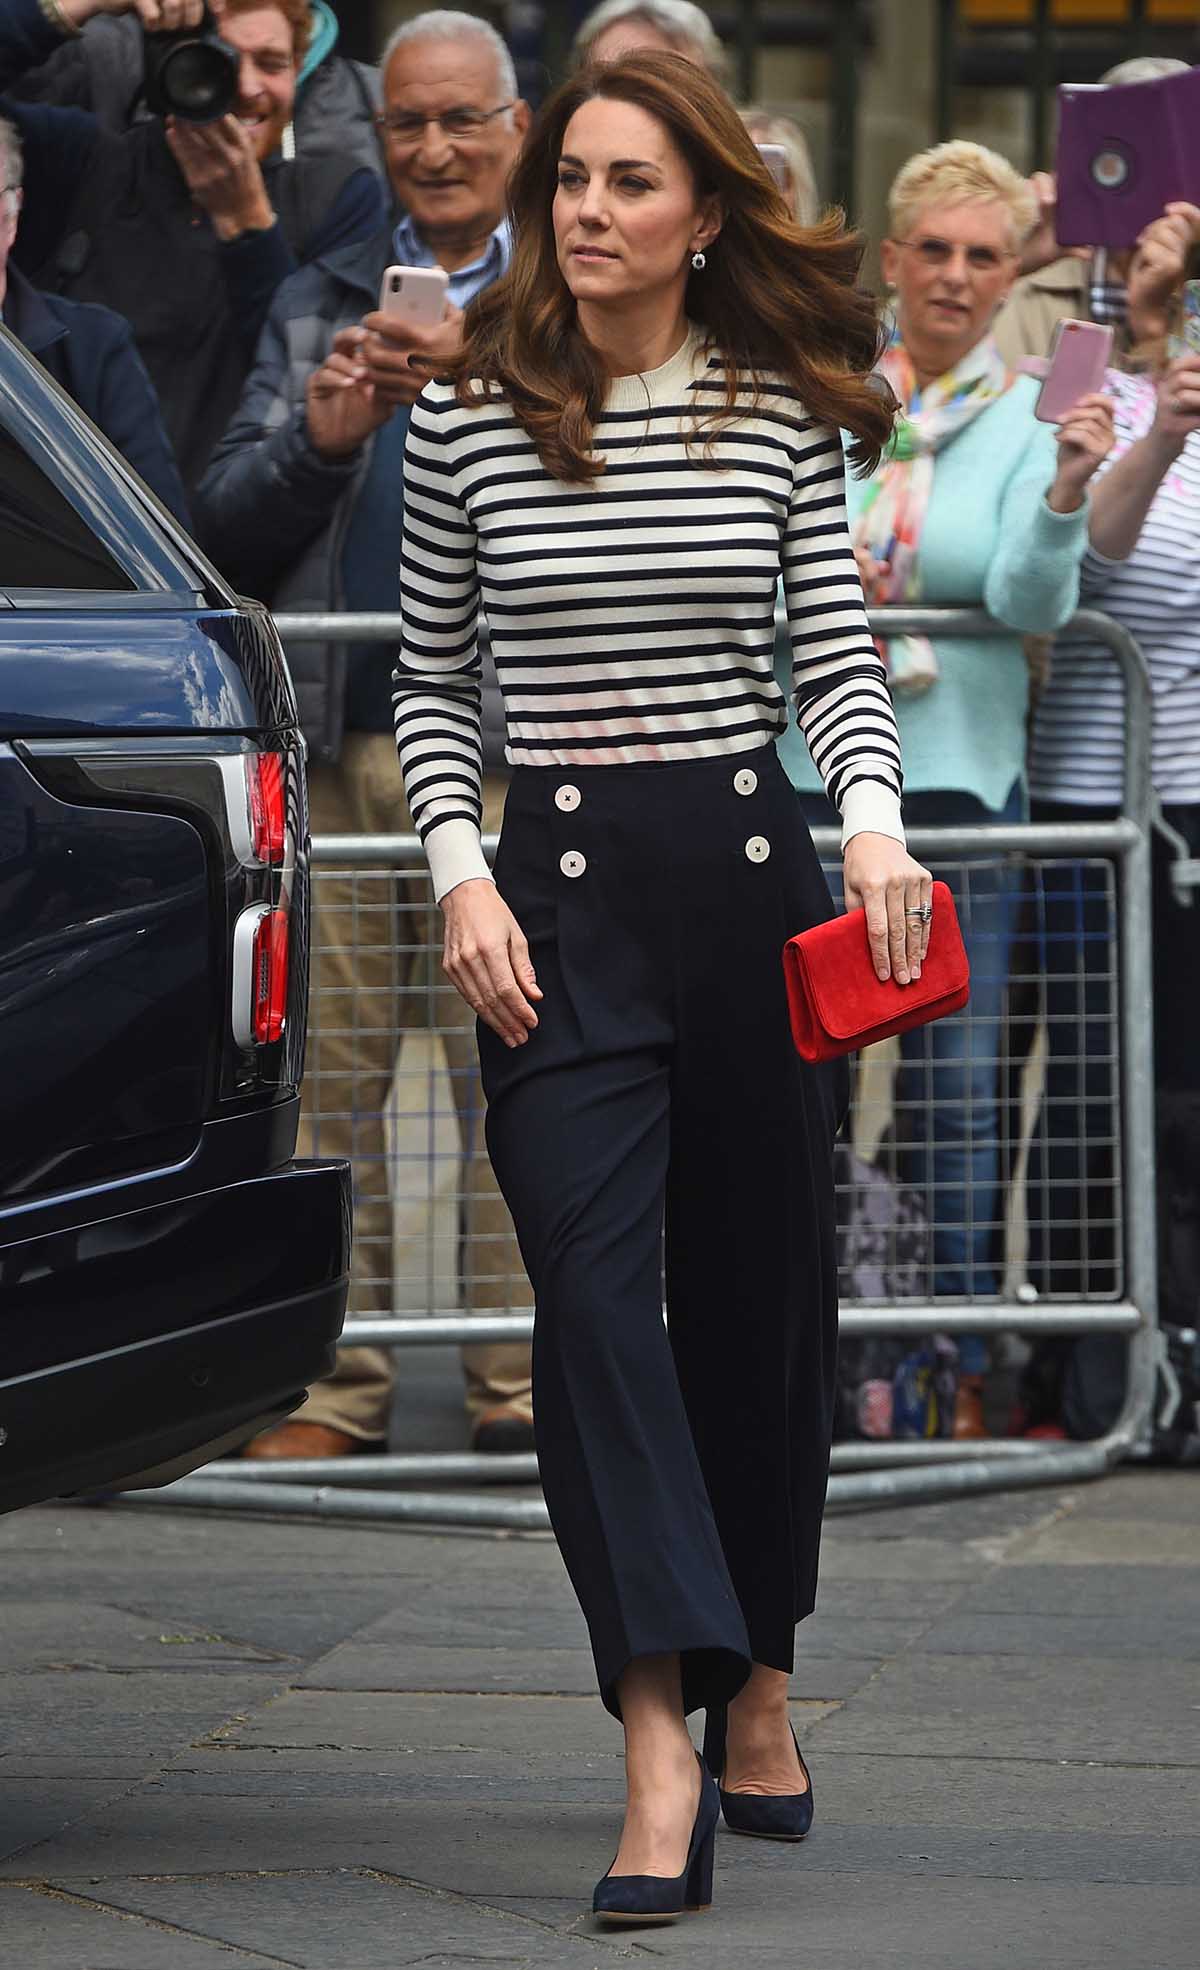 Kate Middleton Duchess of Cambridge attending the King's Cup Regatta in London, Britain May 7, 2019